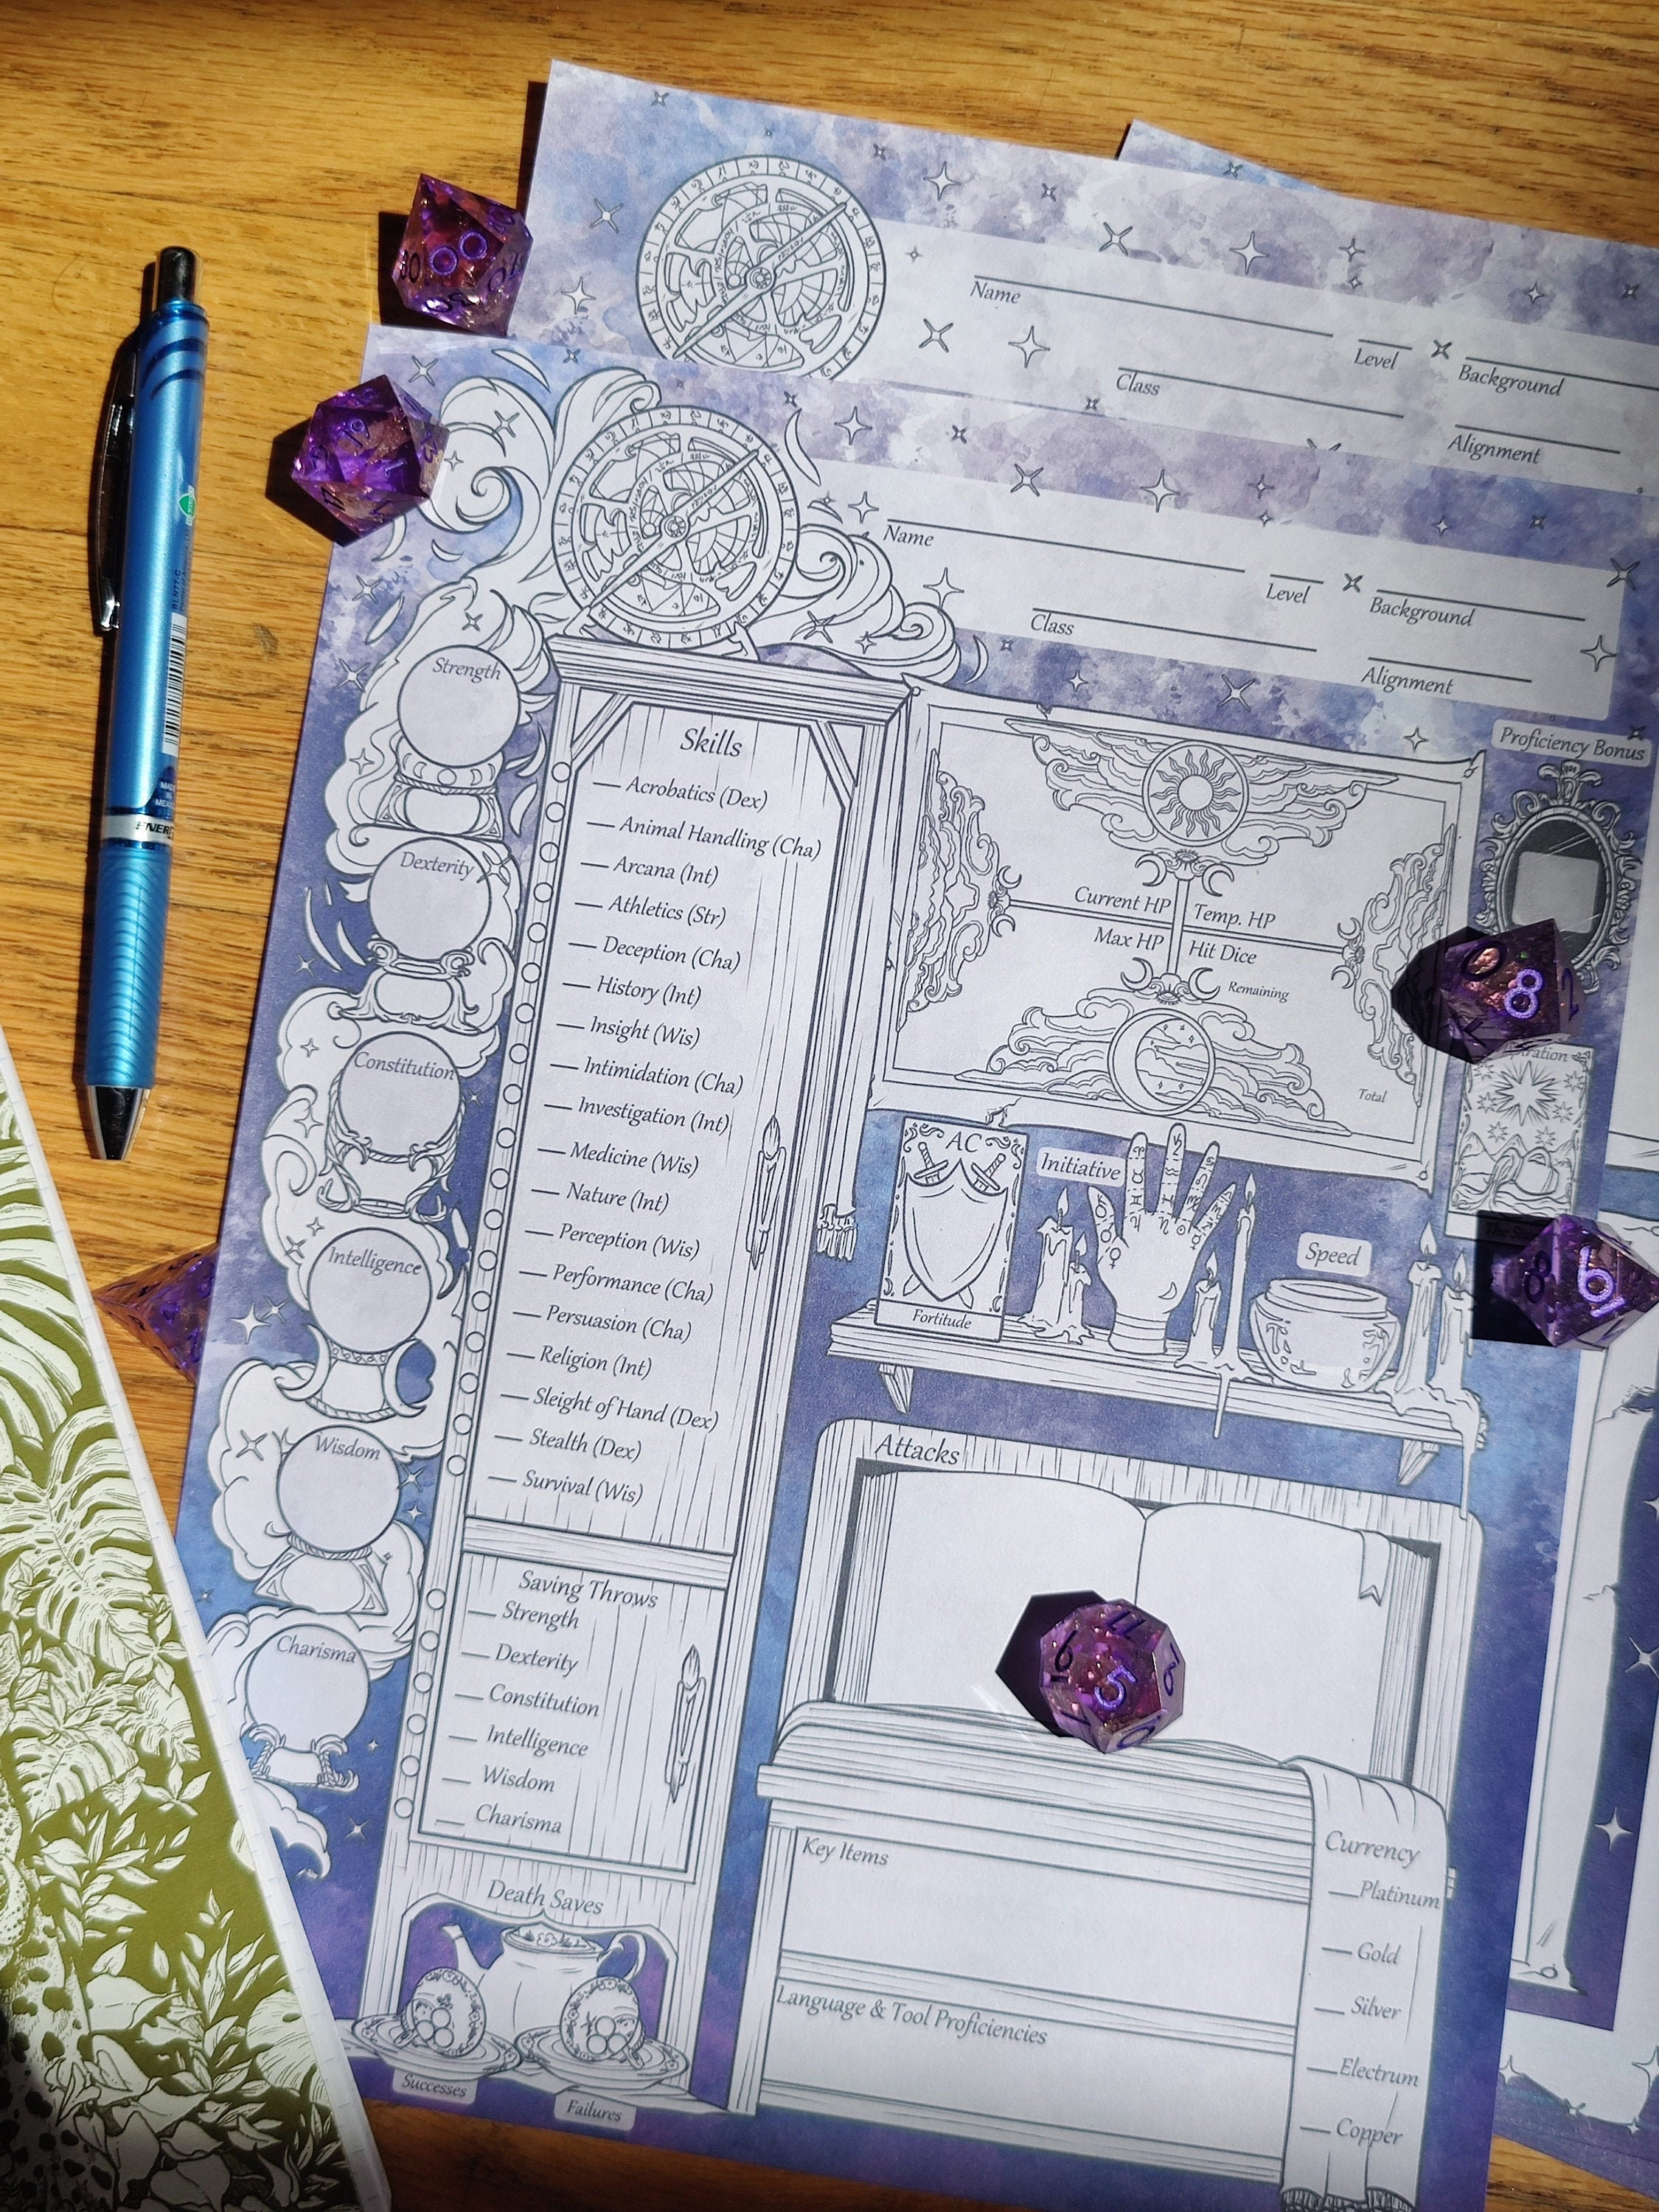 D&D: How To Build The Perfect Divination Wizard